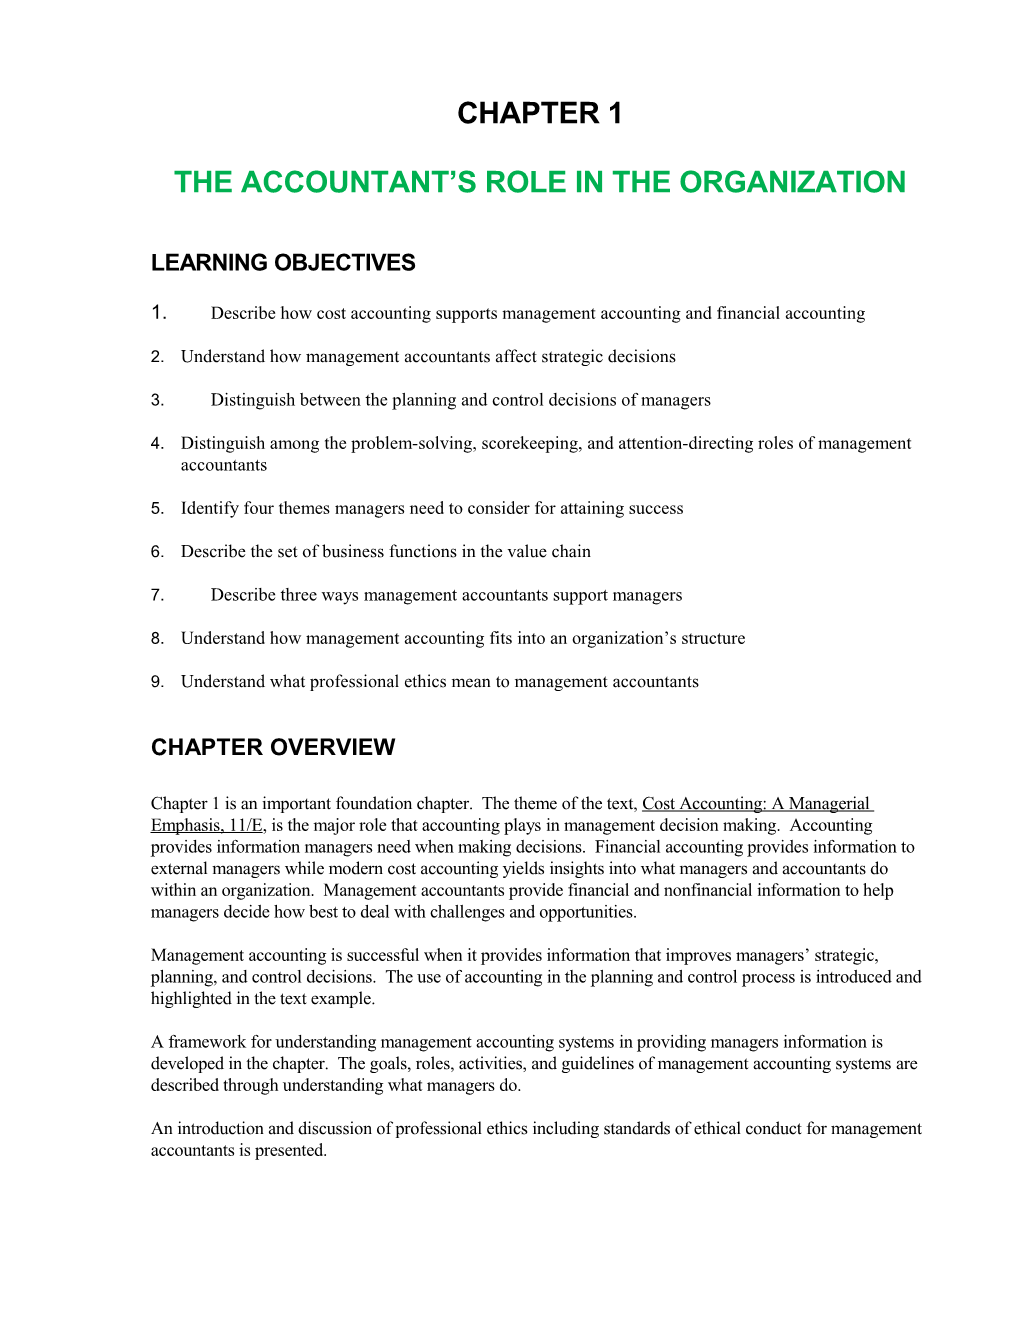 The Accountant S Role in the Organization